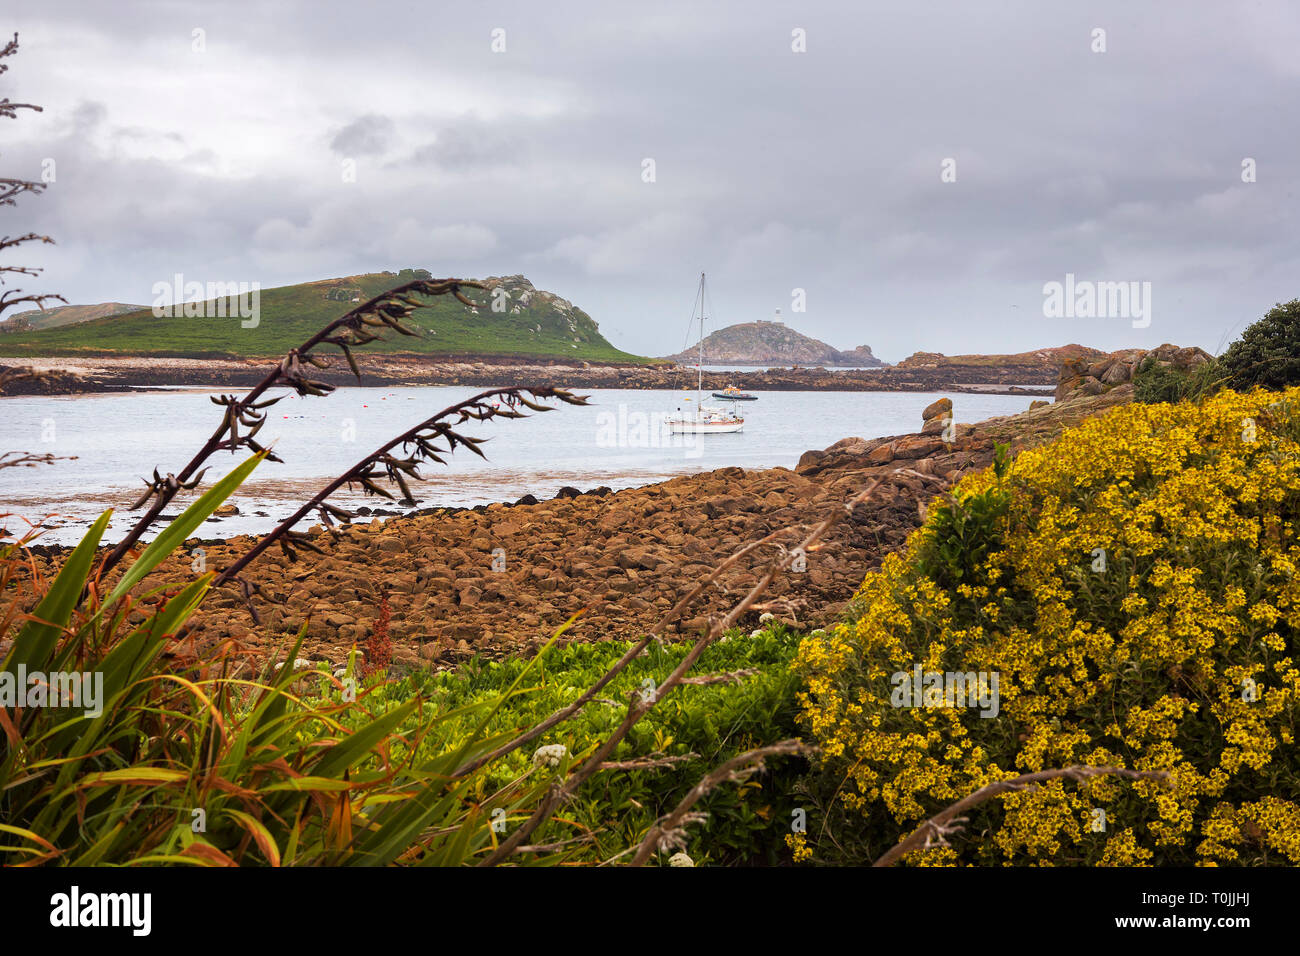 Isles of scilly heritage coast stock and - Alamy